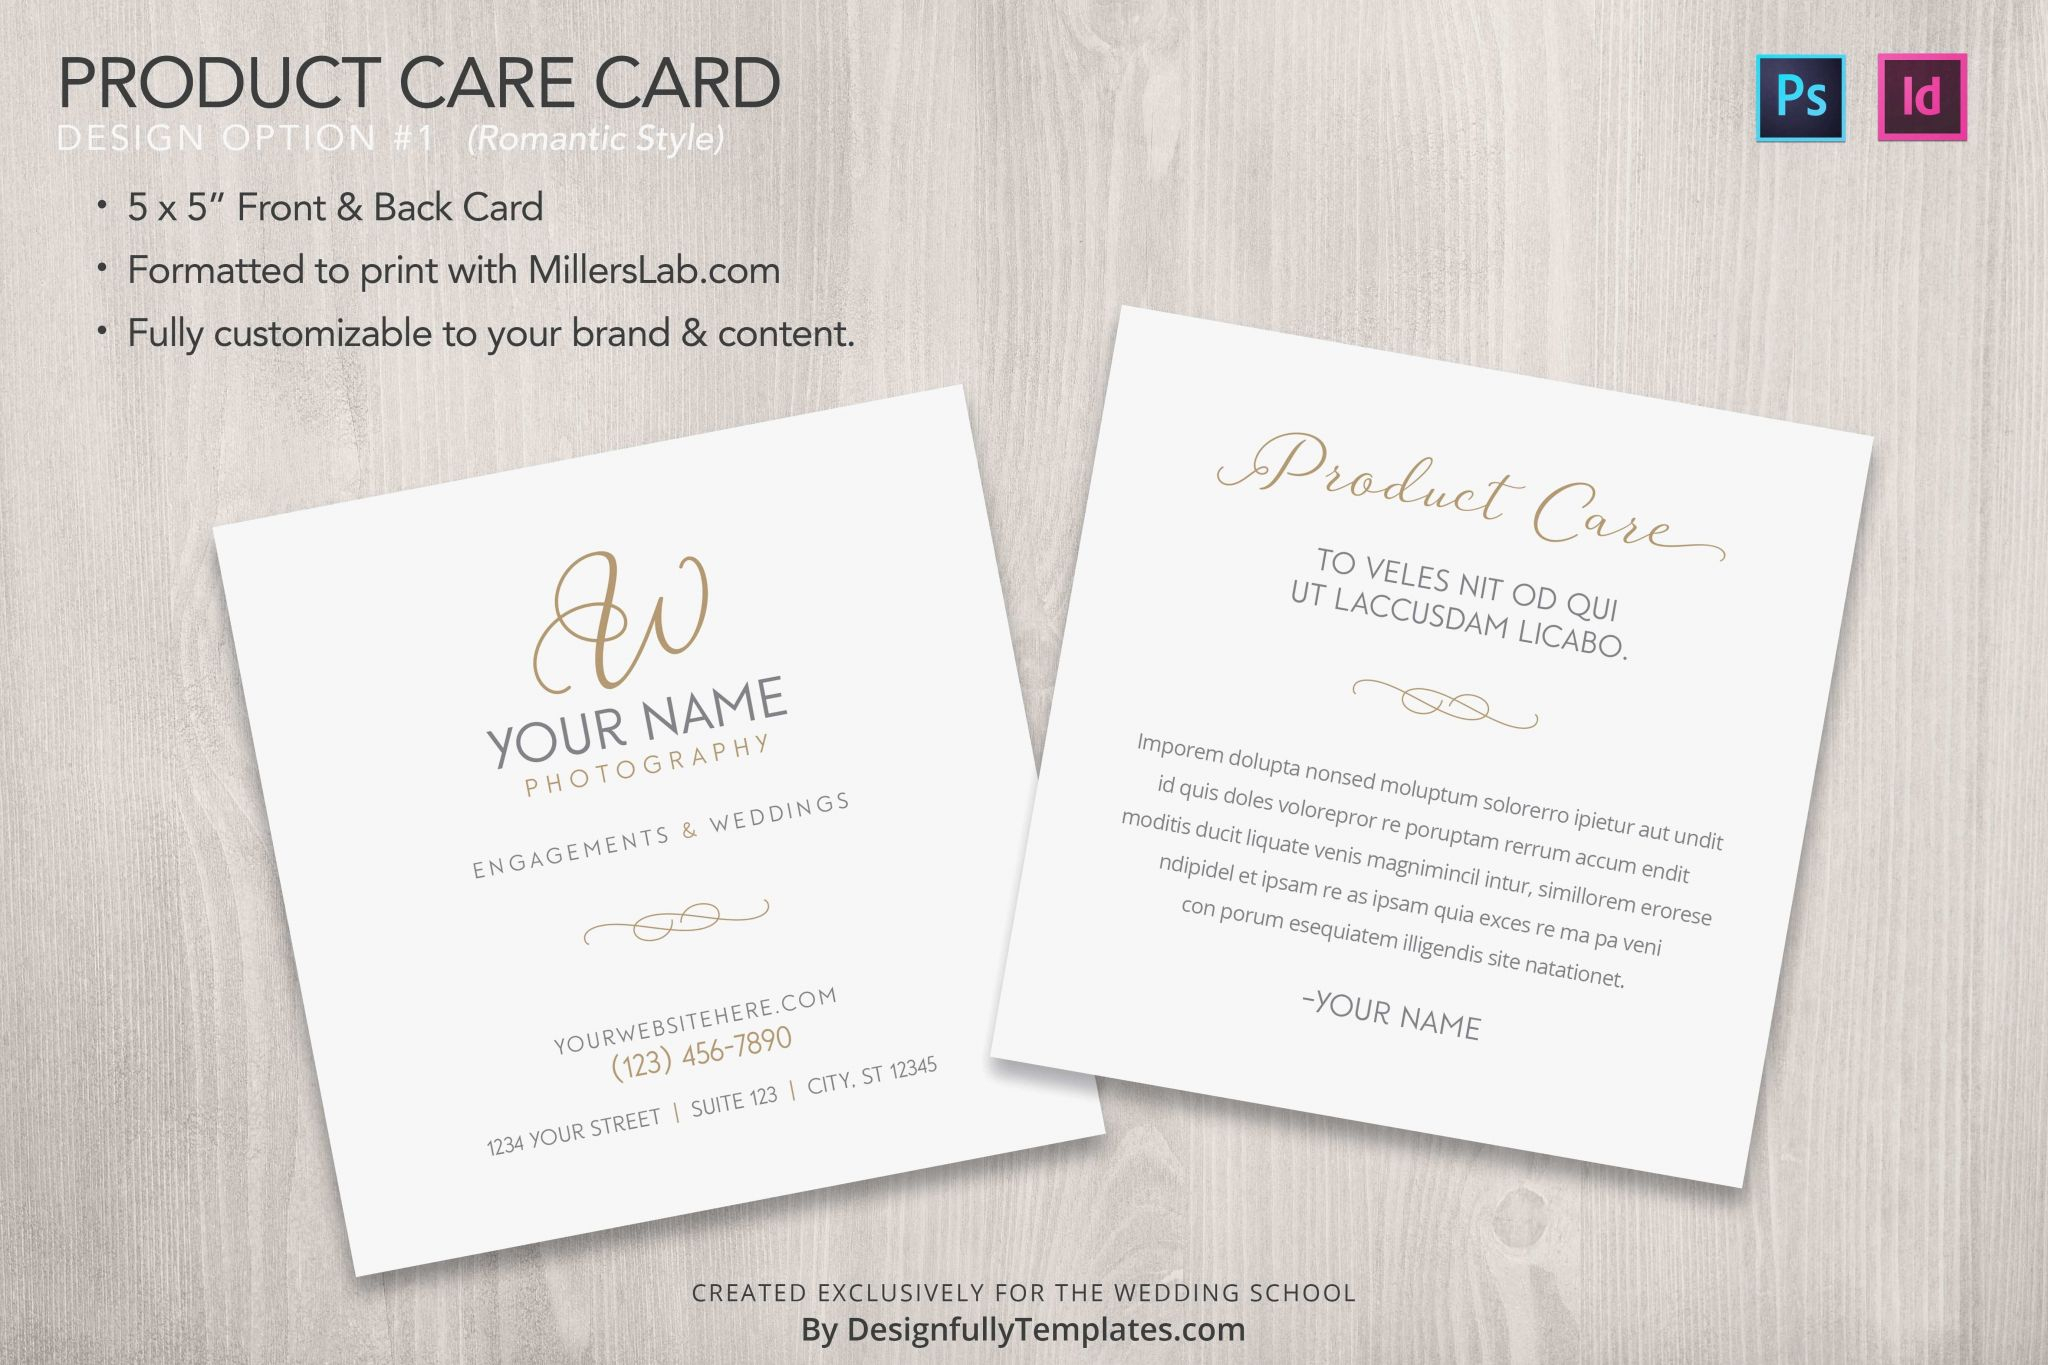 Free Place Card Templates 6 Per Page - Atlantaauctionco Inside Place Card Template Free 6 Per Page